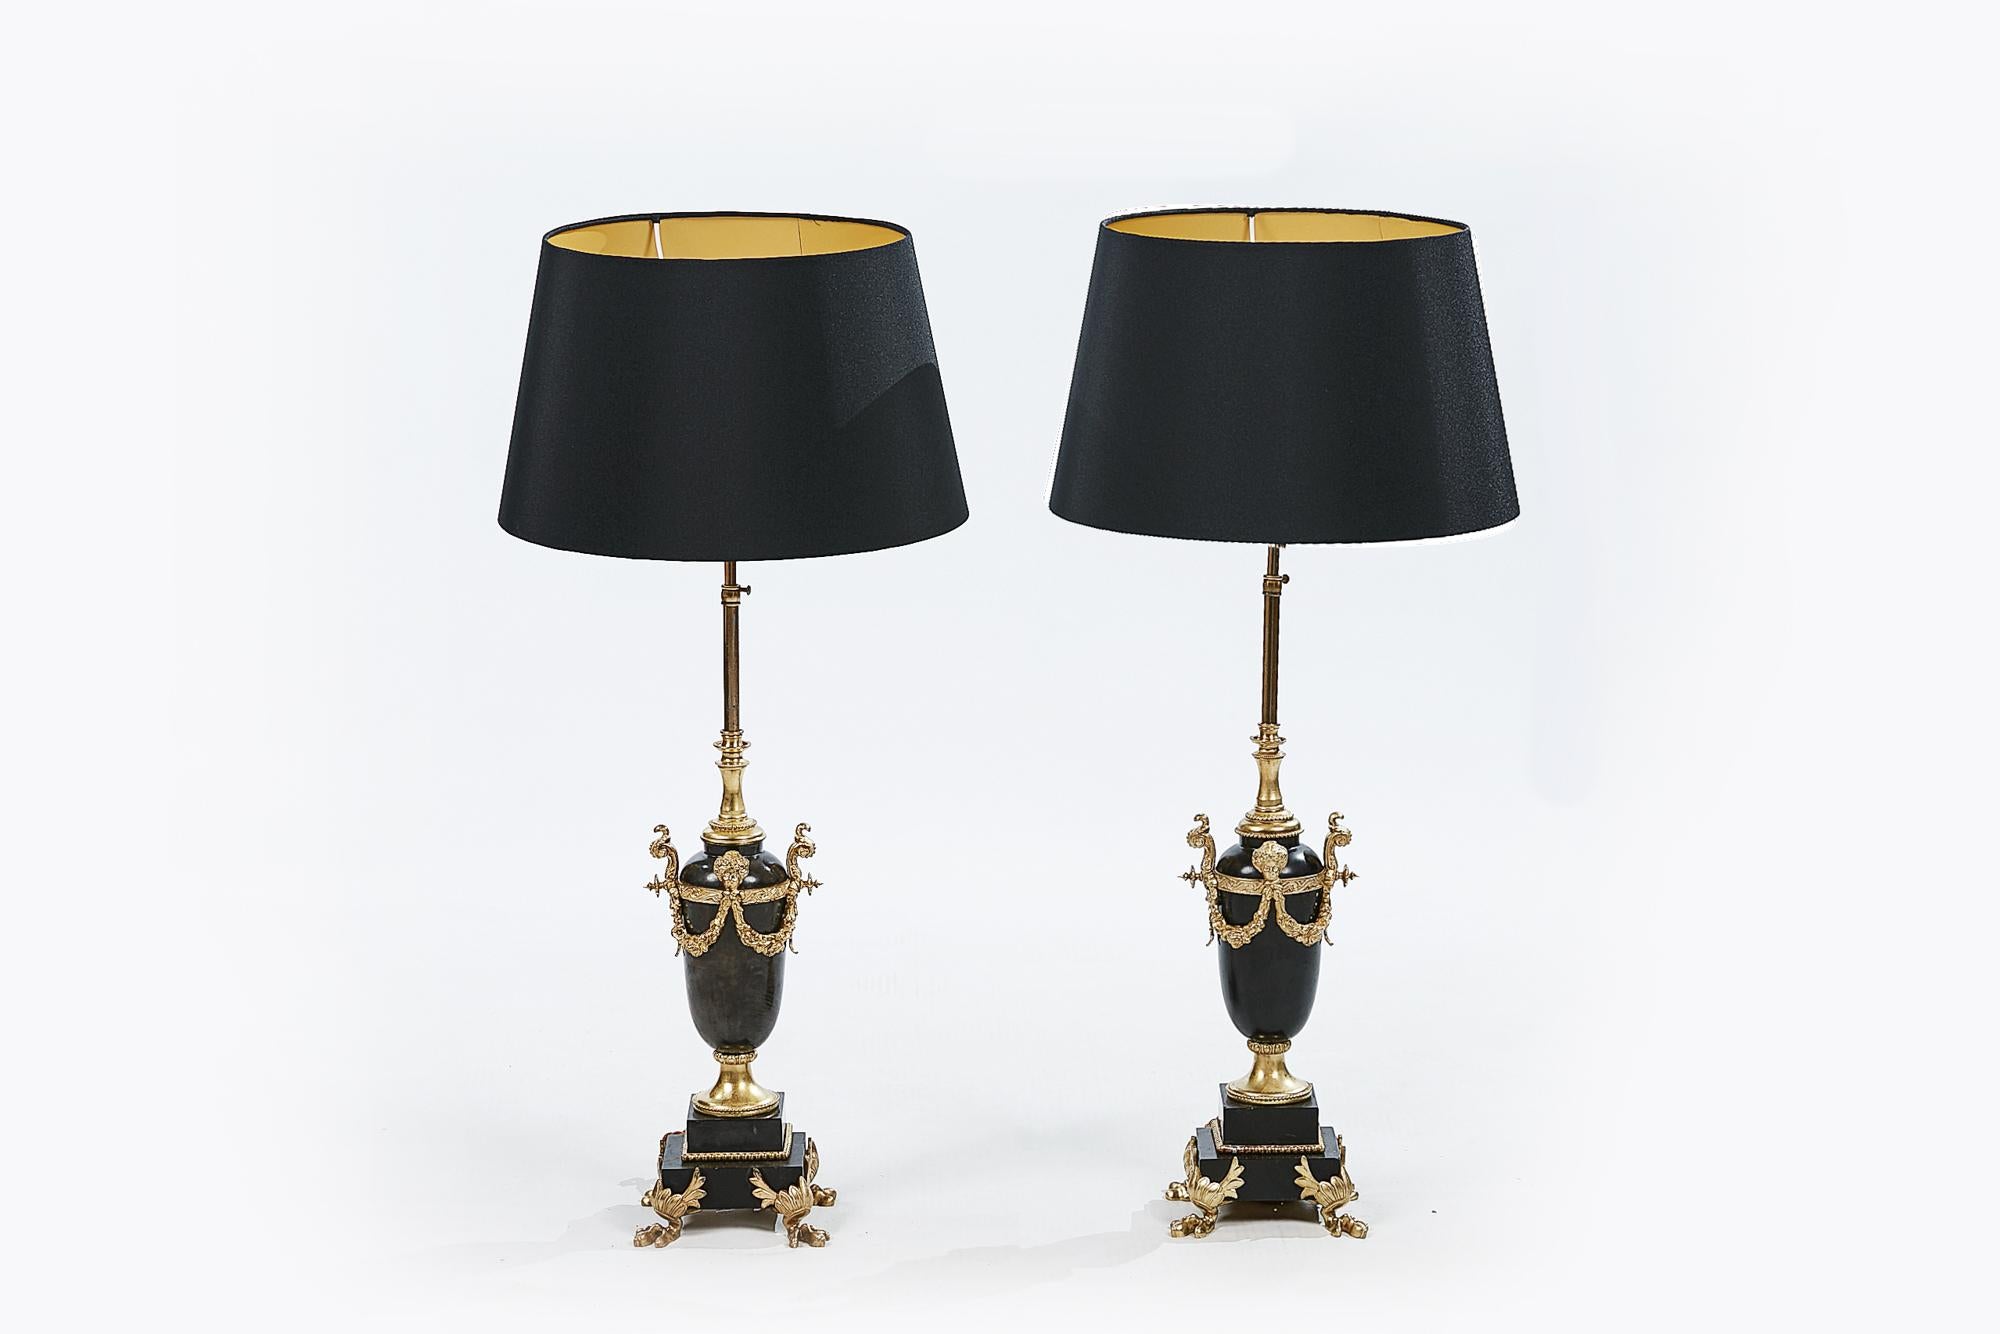 Irish Pair of 20th Century Marble and Gilt Lamps in the Neoclassical Style